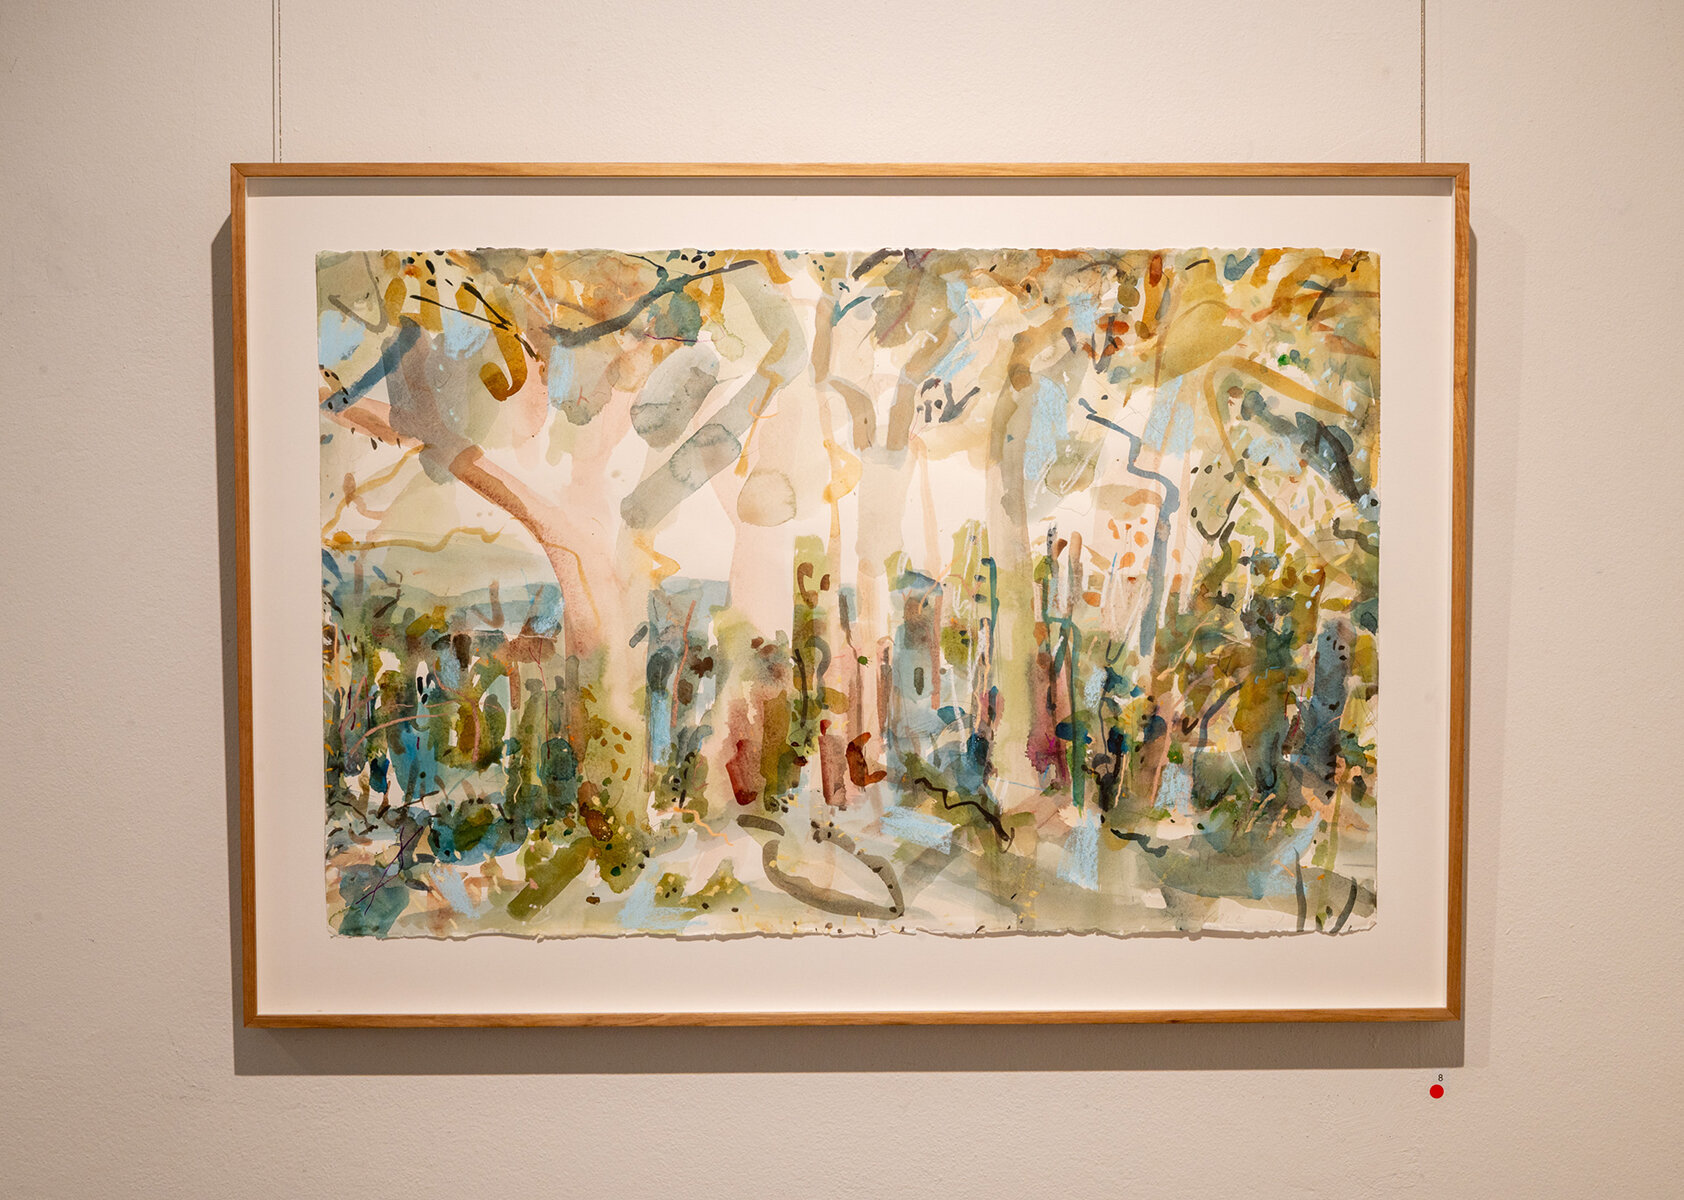   Wandoo Observation Area,  2021 Watercolour and pastel on Arches paper, 68 x 102 cm Private Collection 